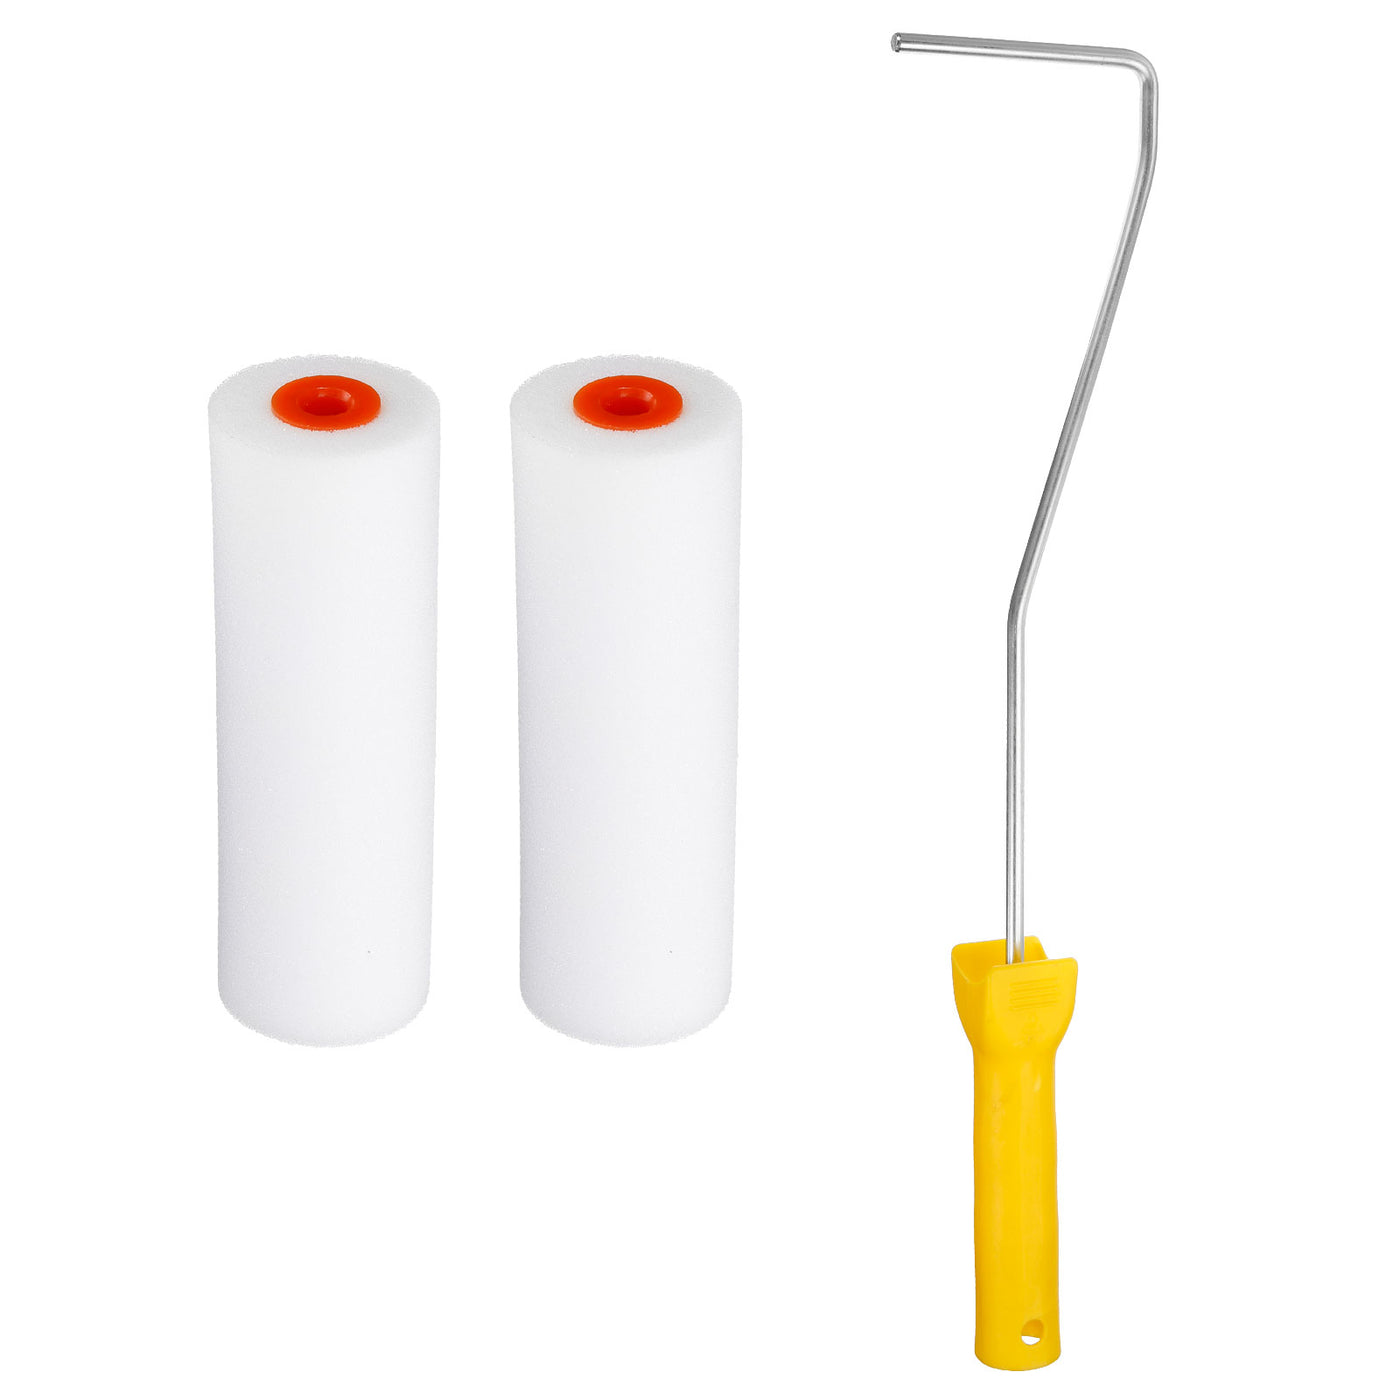 uxcell Uxcell 3Pcs Paint Roller Set, 2Pcs 4" Water Based Sponge Roller Covers and 16" Paint Roller Frame